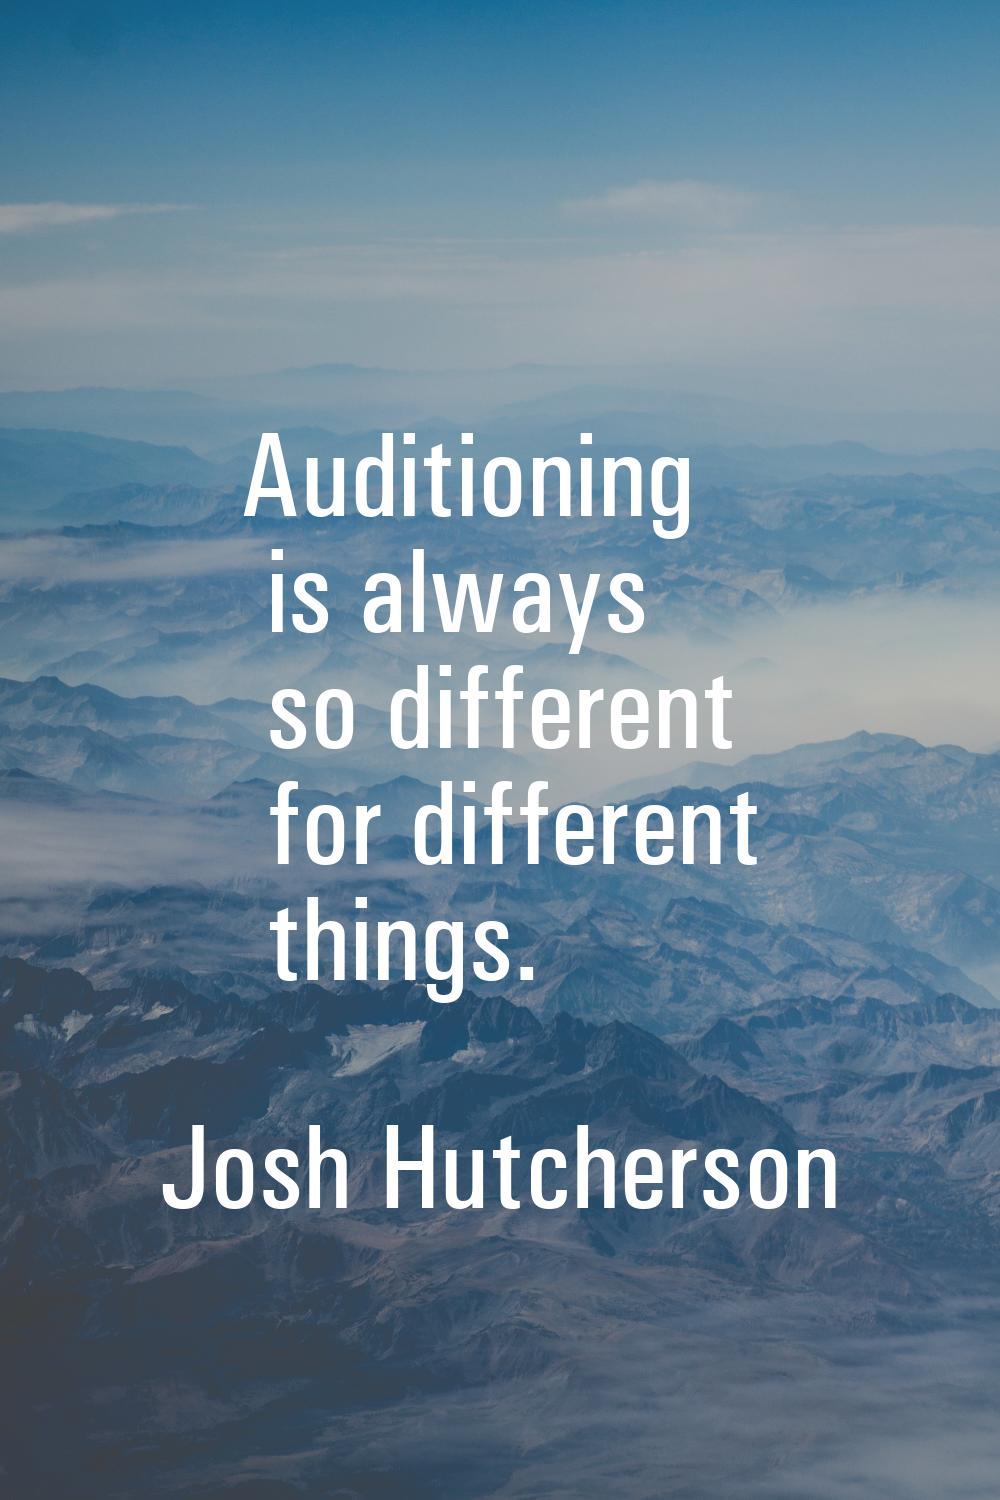 Auditioning is always so different for different things.